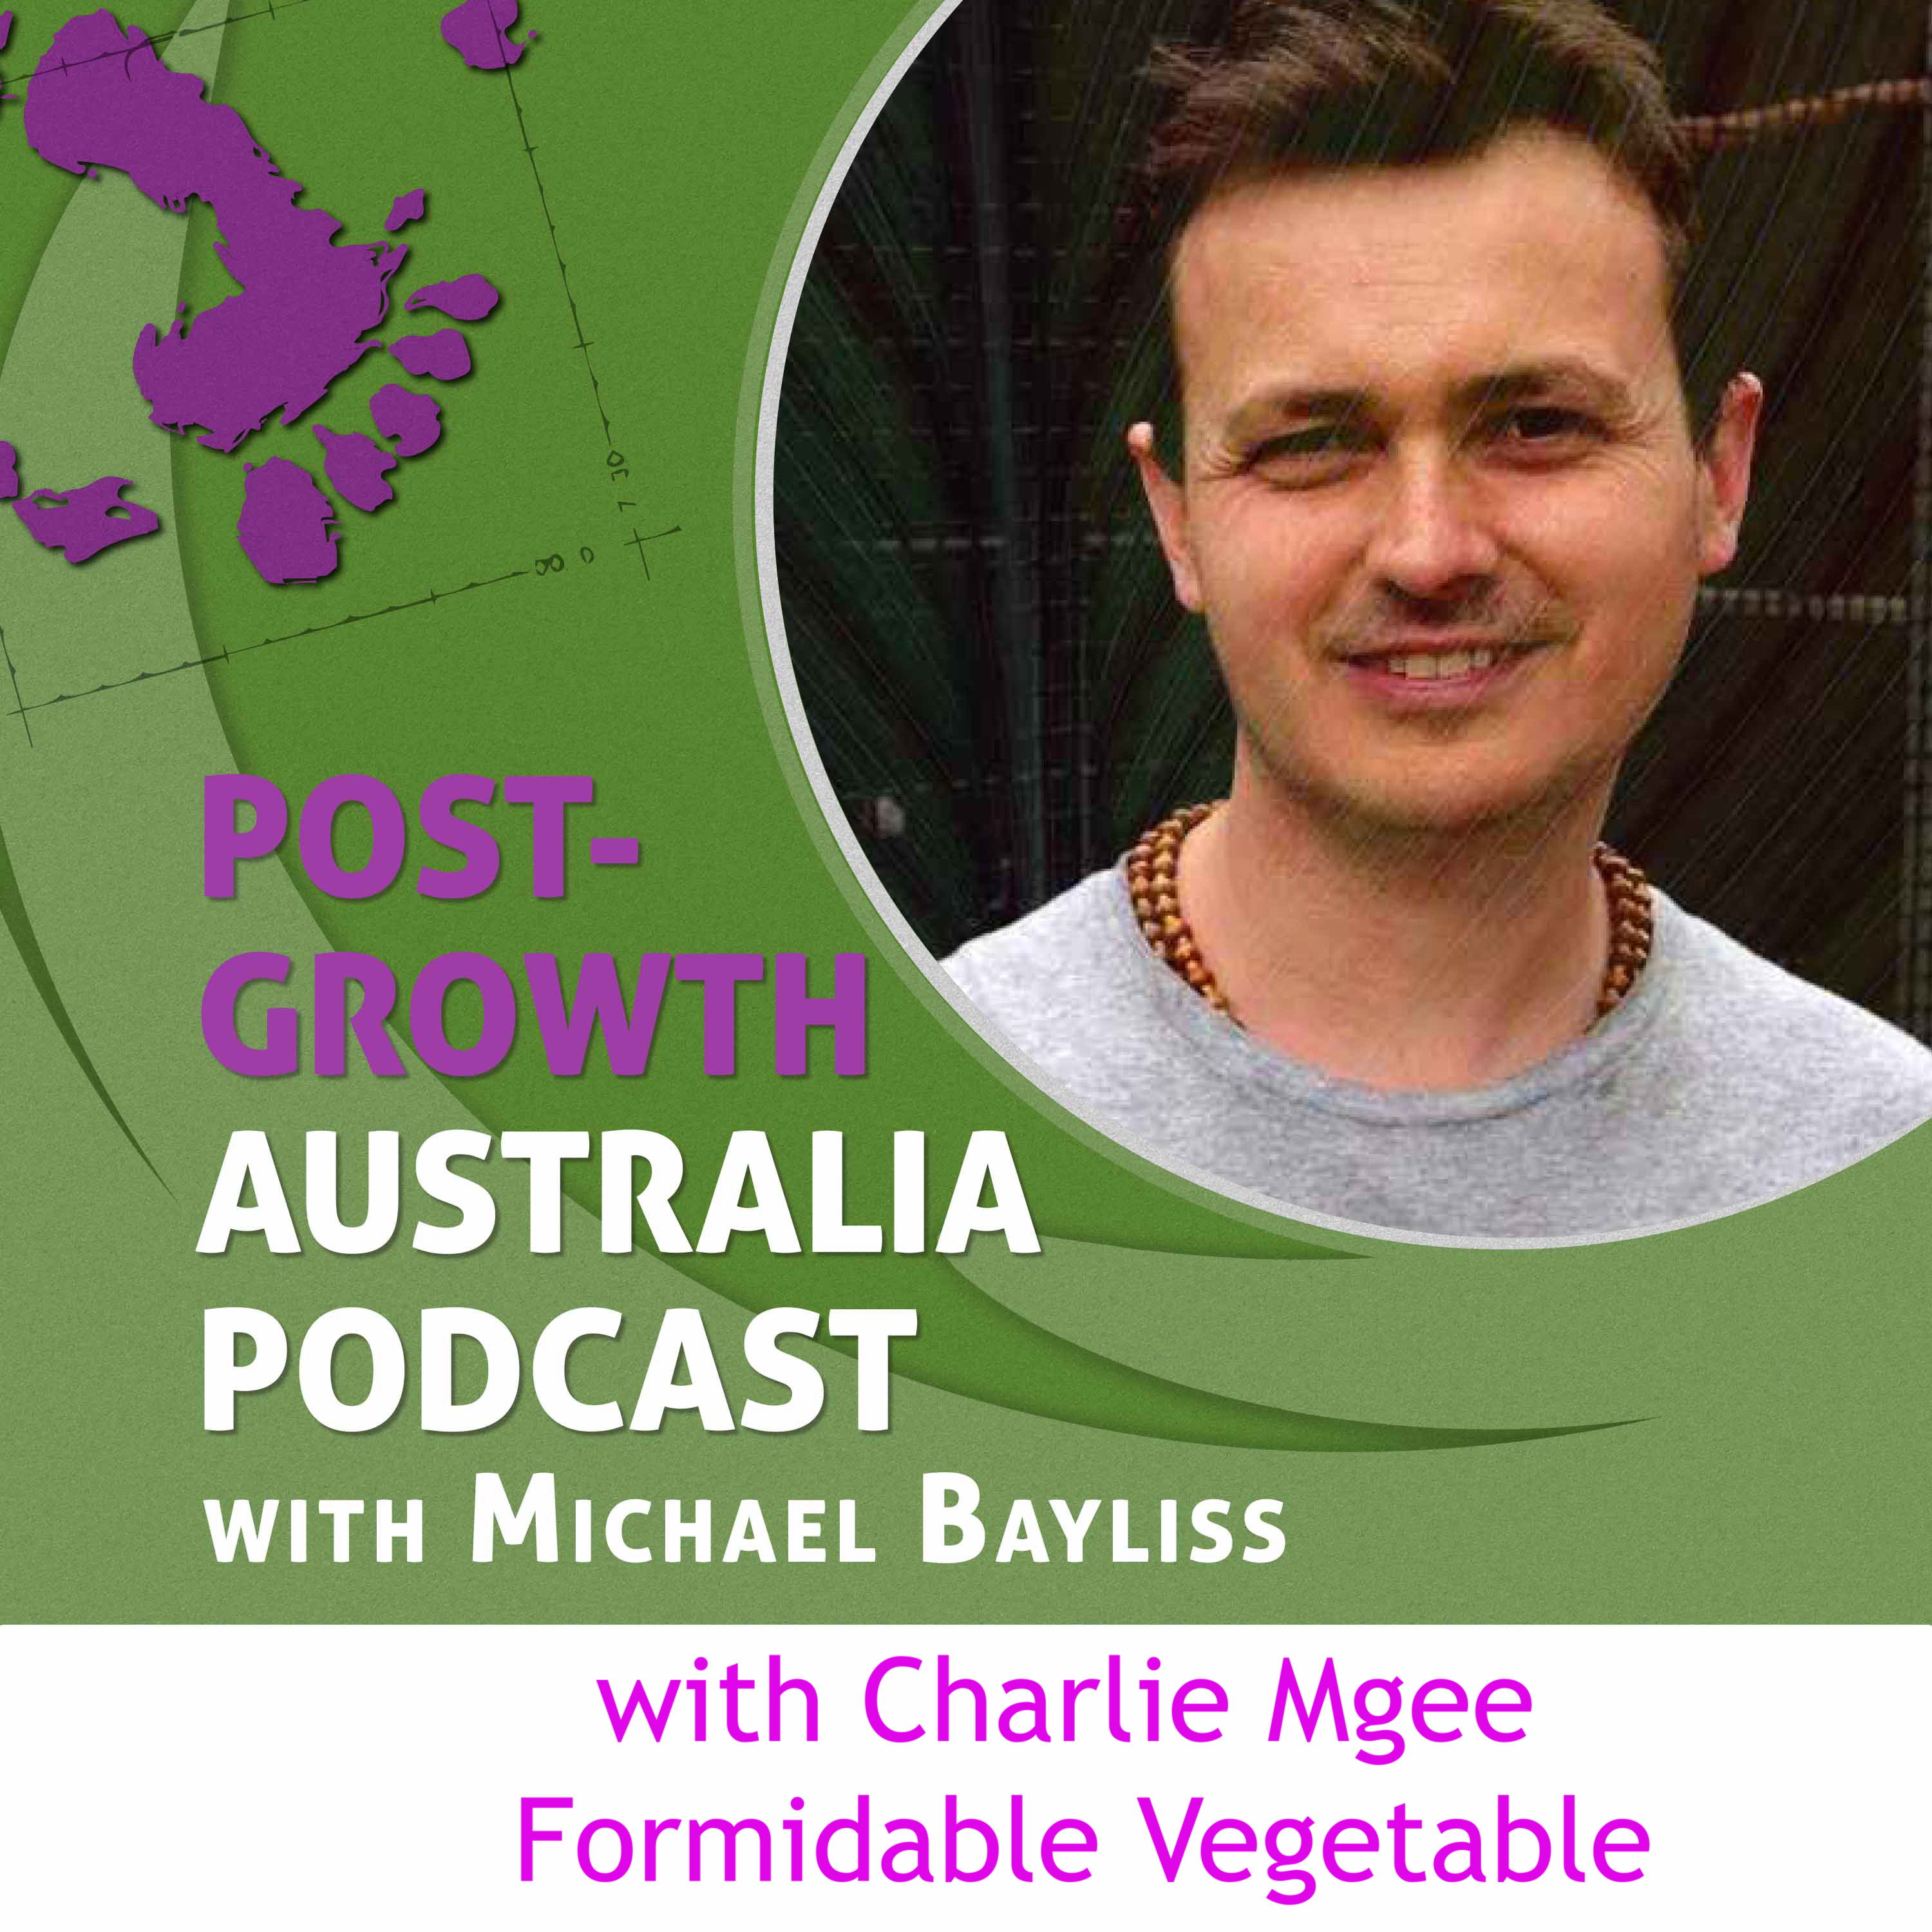 Season 3 Finale with Charlie Mgee from Formidable Vegetable